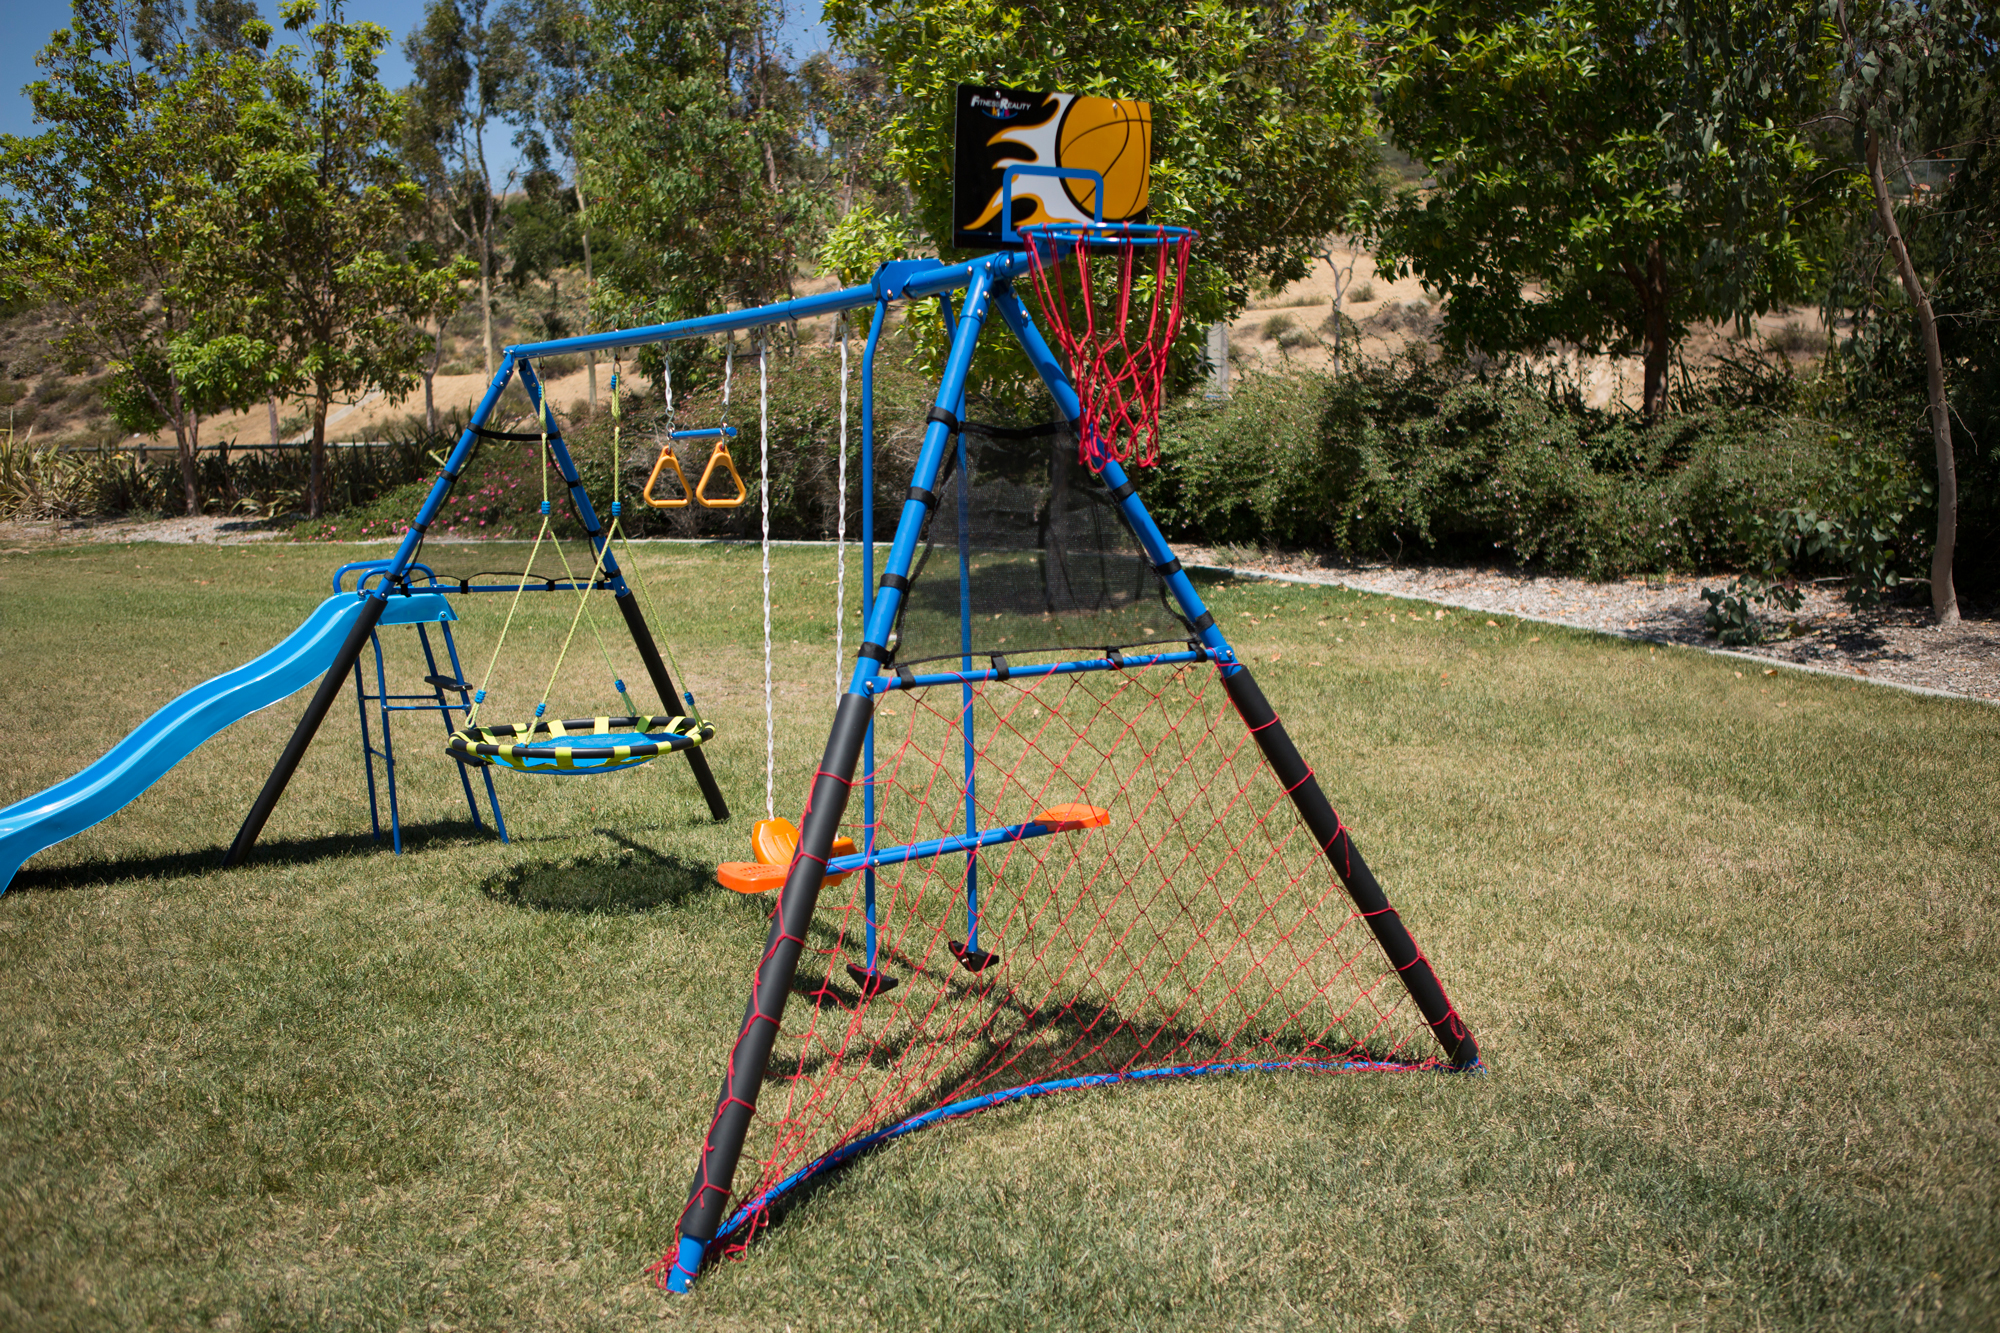 Fitness Reality Kids 'The Ultimate' 8 Station Sports Series Metal Swing Set with Basketball and Soccer - image 14 of 16